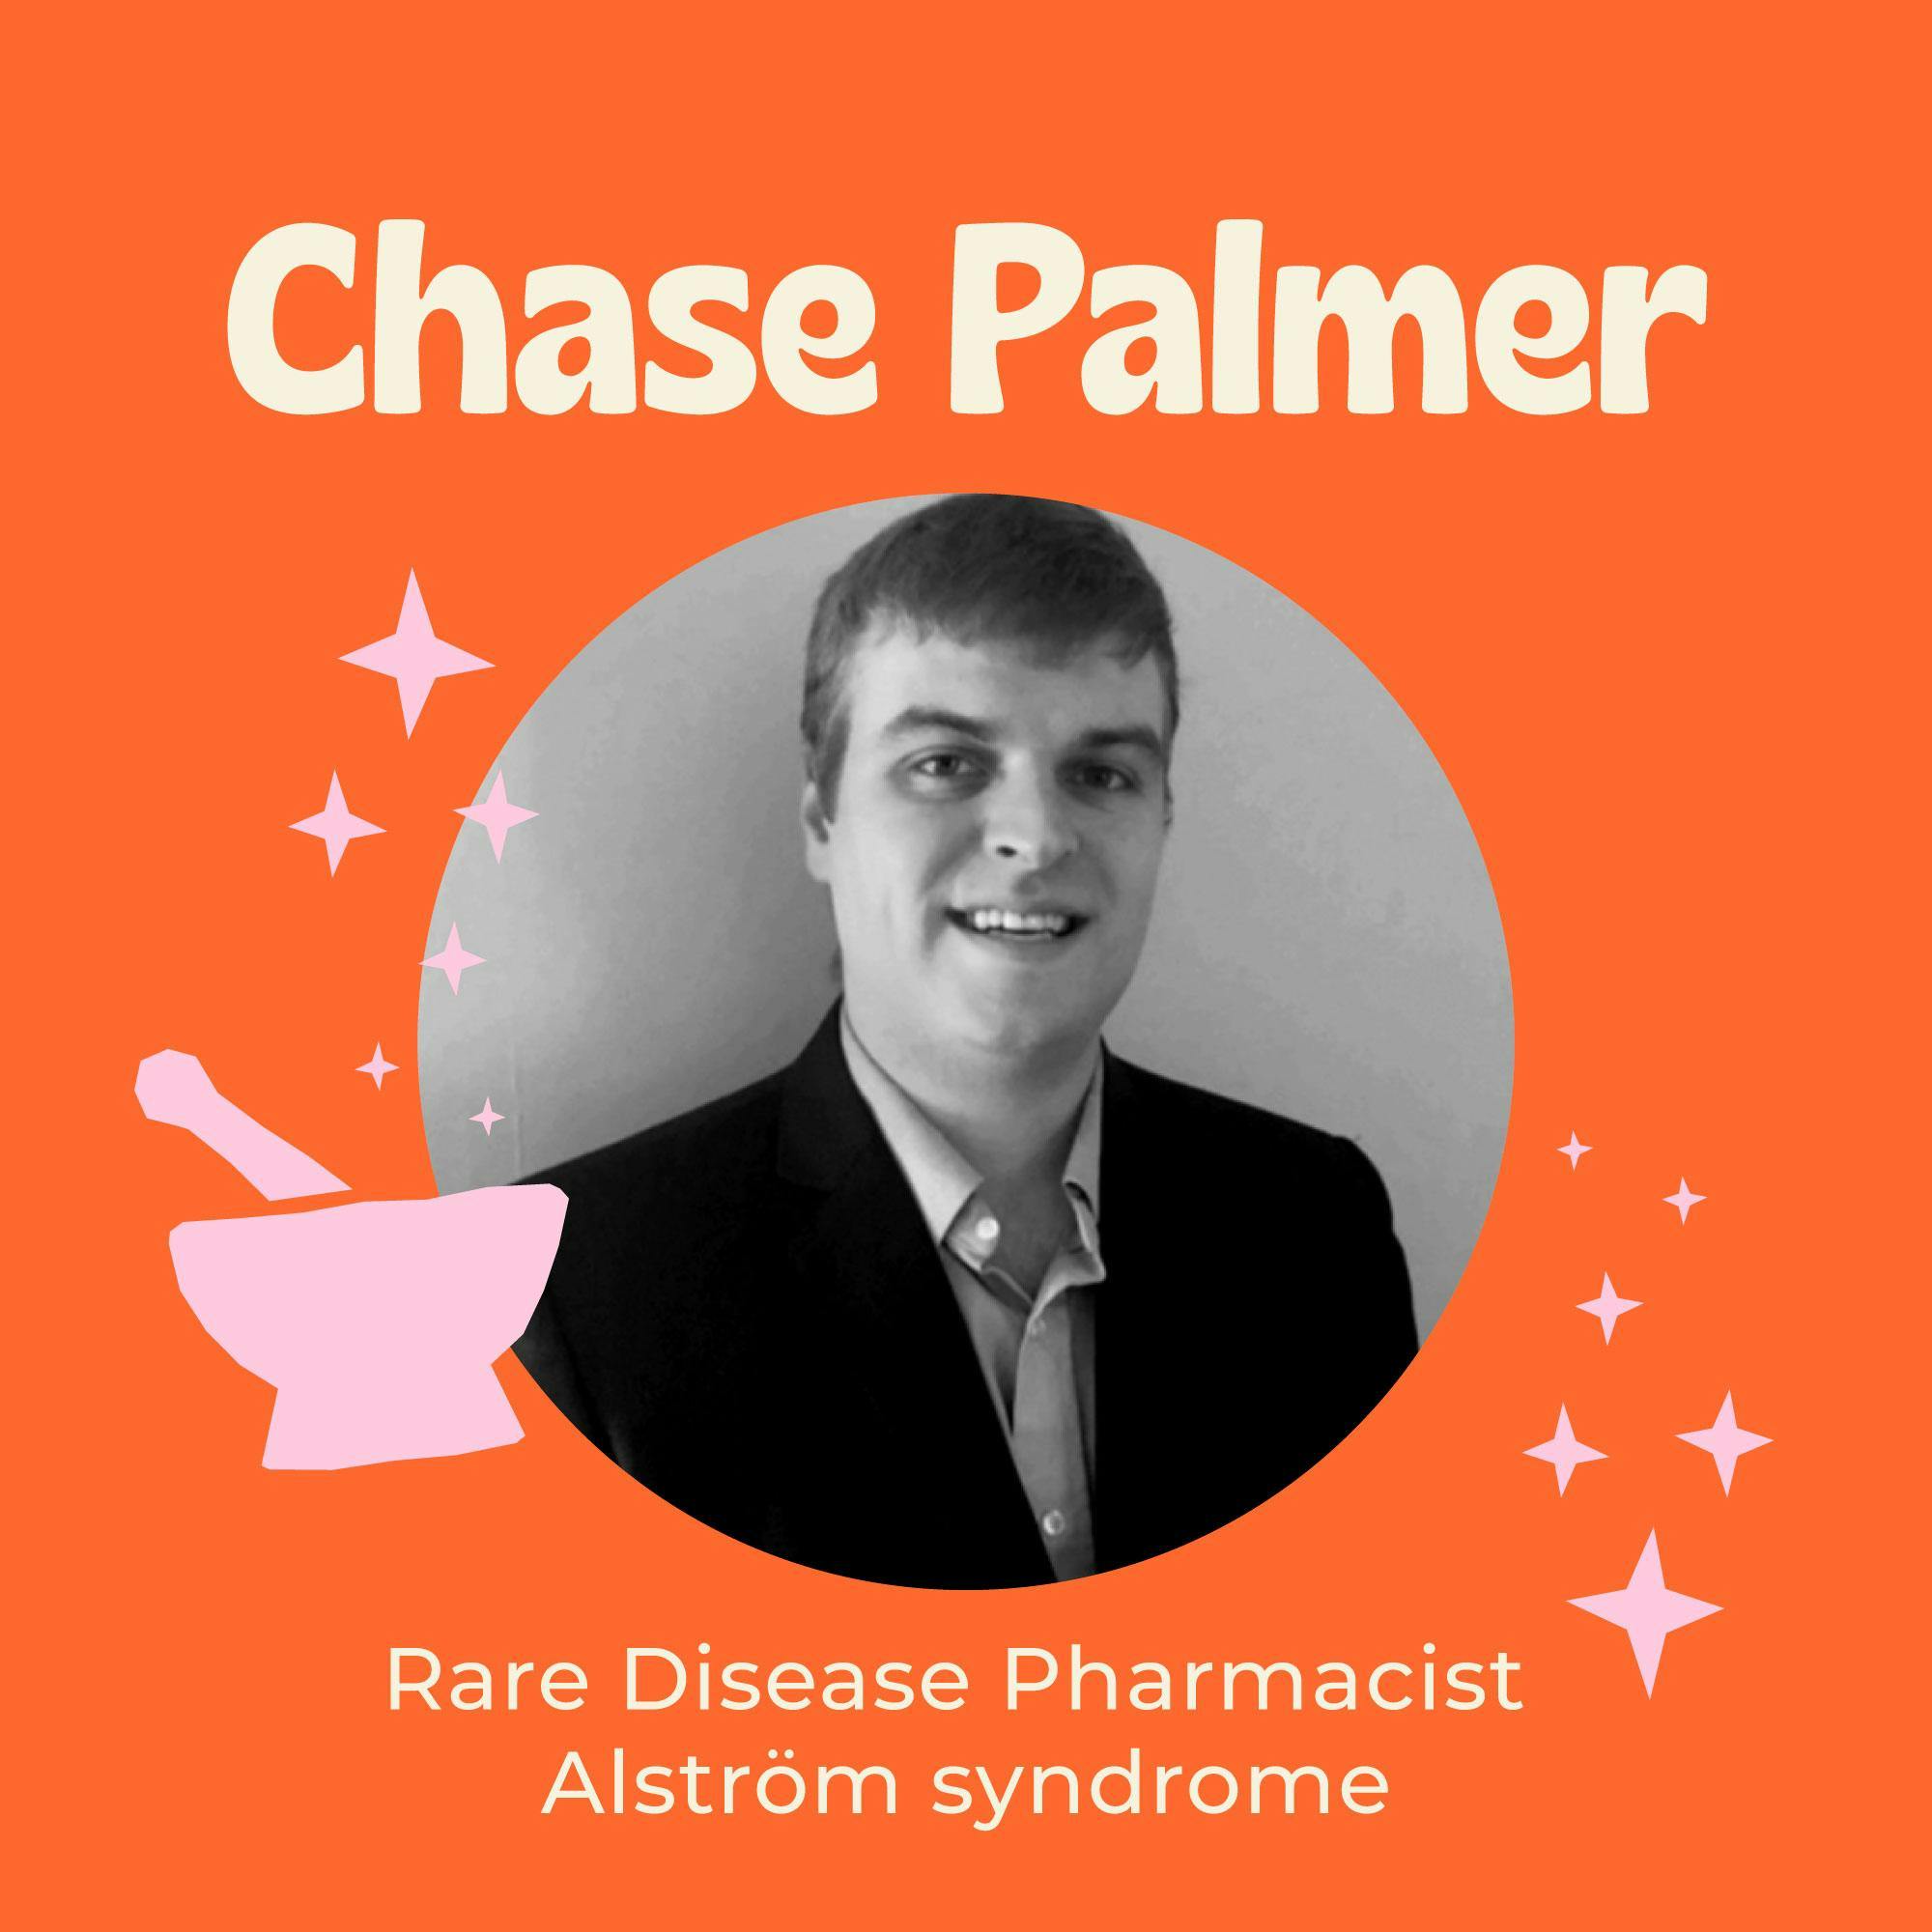 Care Team Prescription – The Importance of Clinical Pharmacists with Chase Palmer